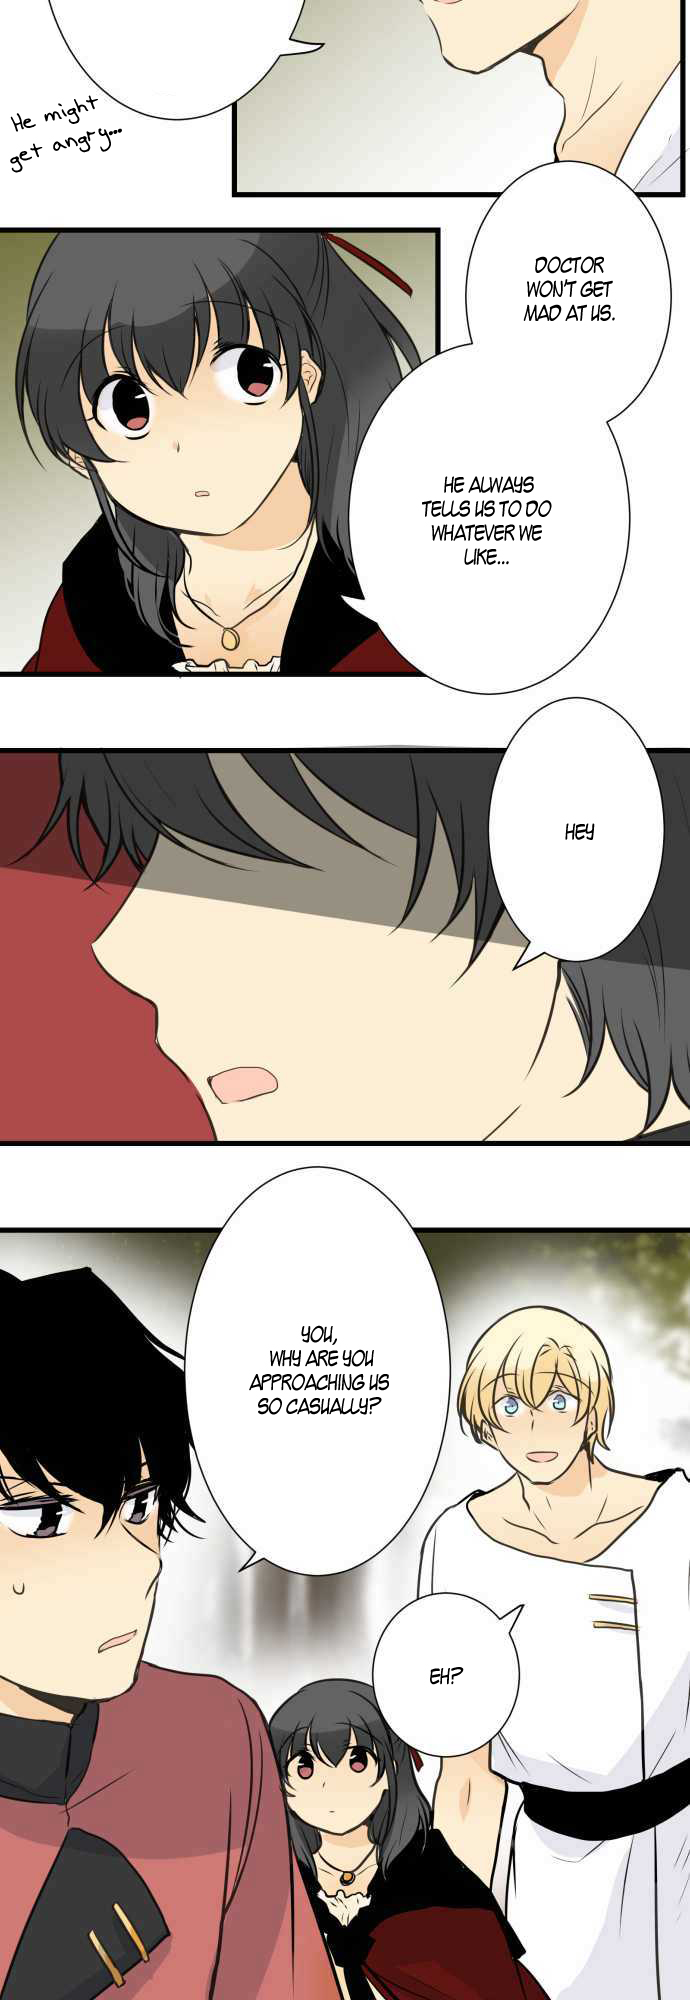 Our Amnesia Ch. 6 Contact (1)